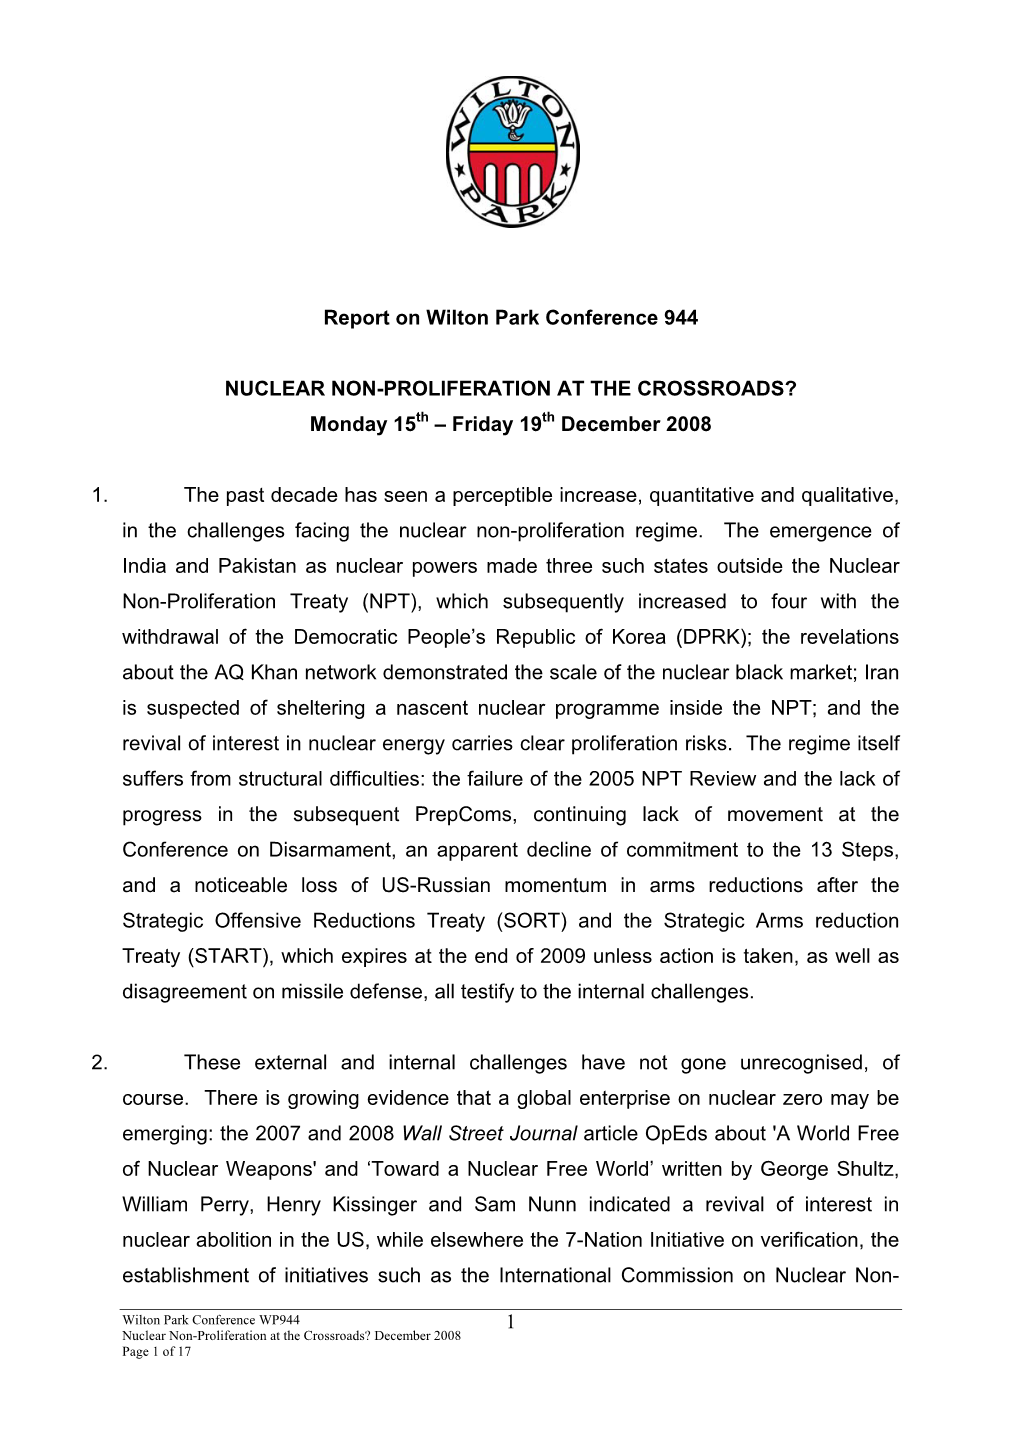 PDF Report for Nuclear Non-Proliferation at The